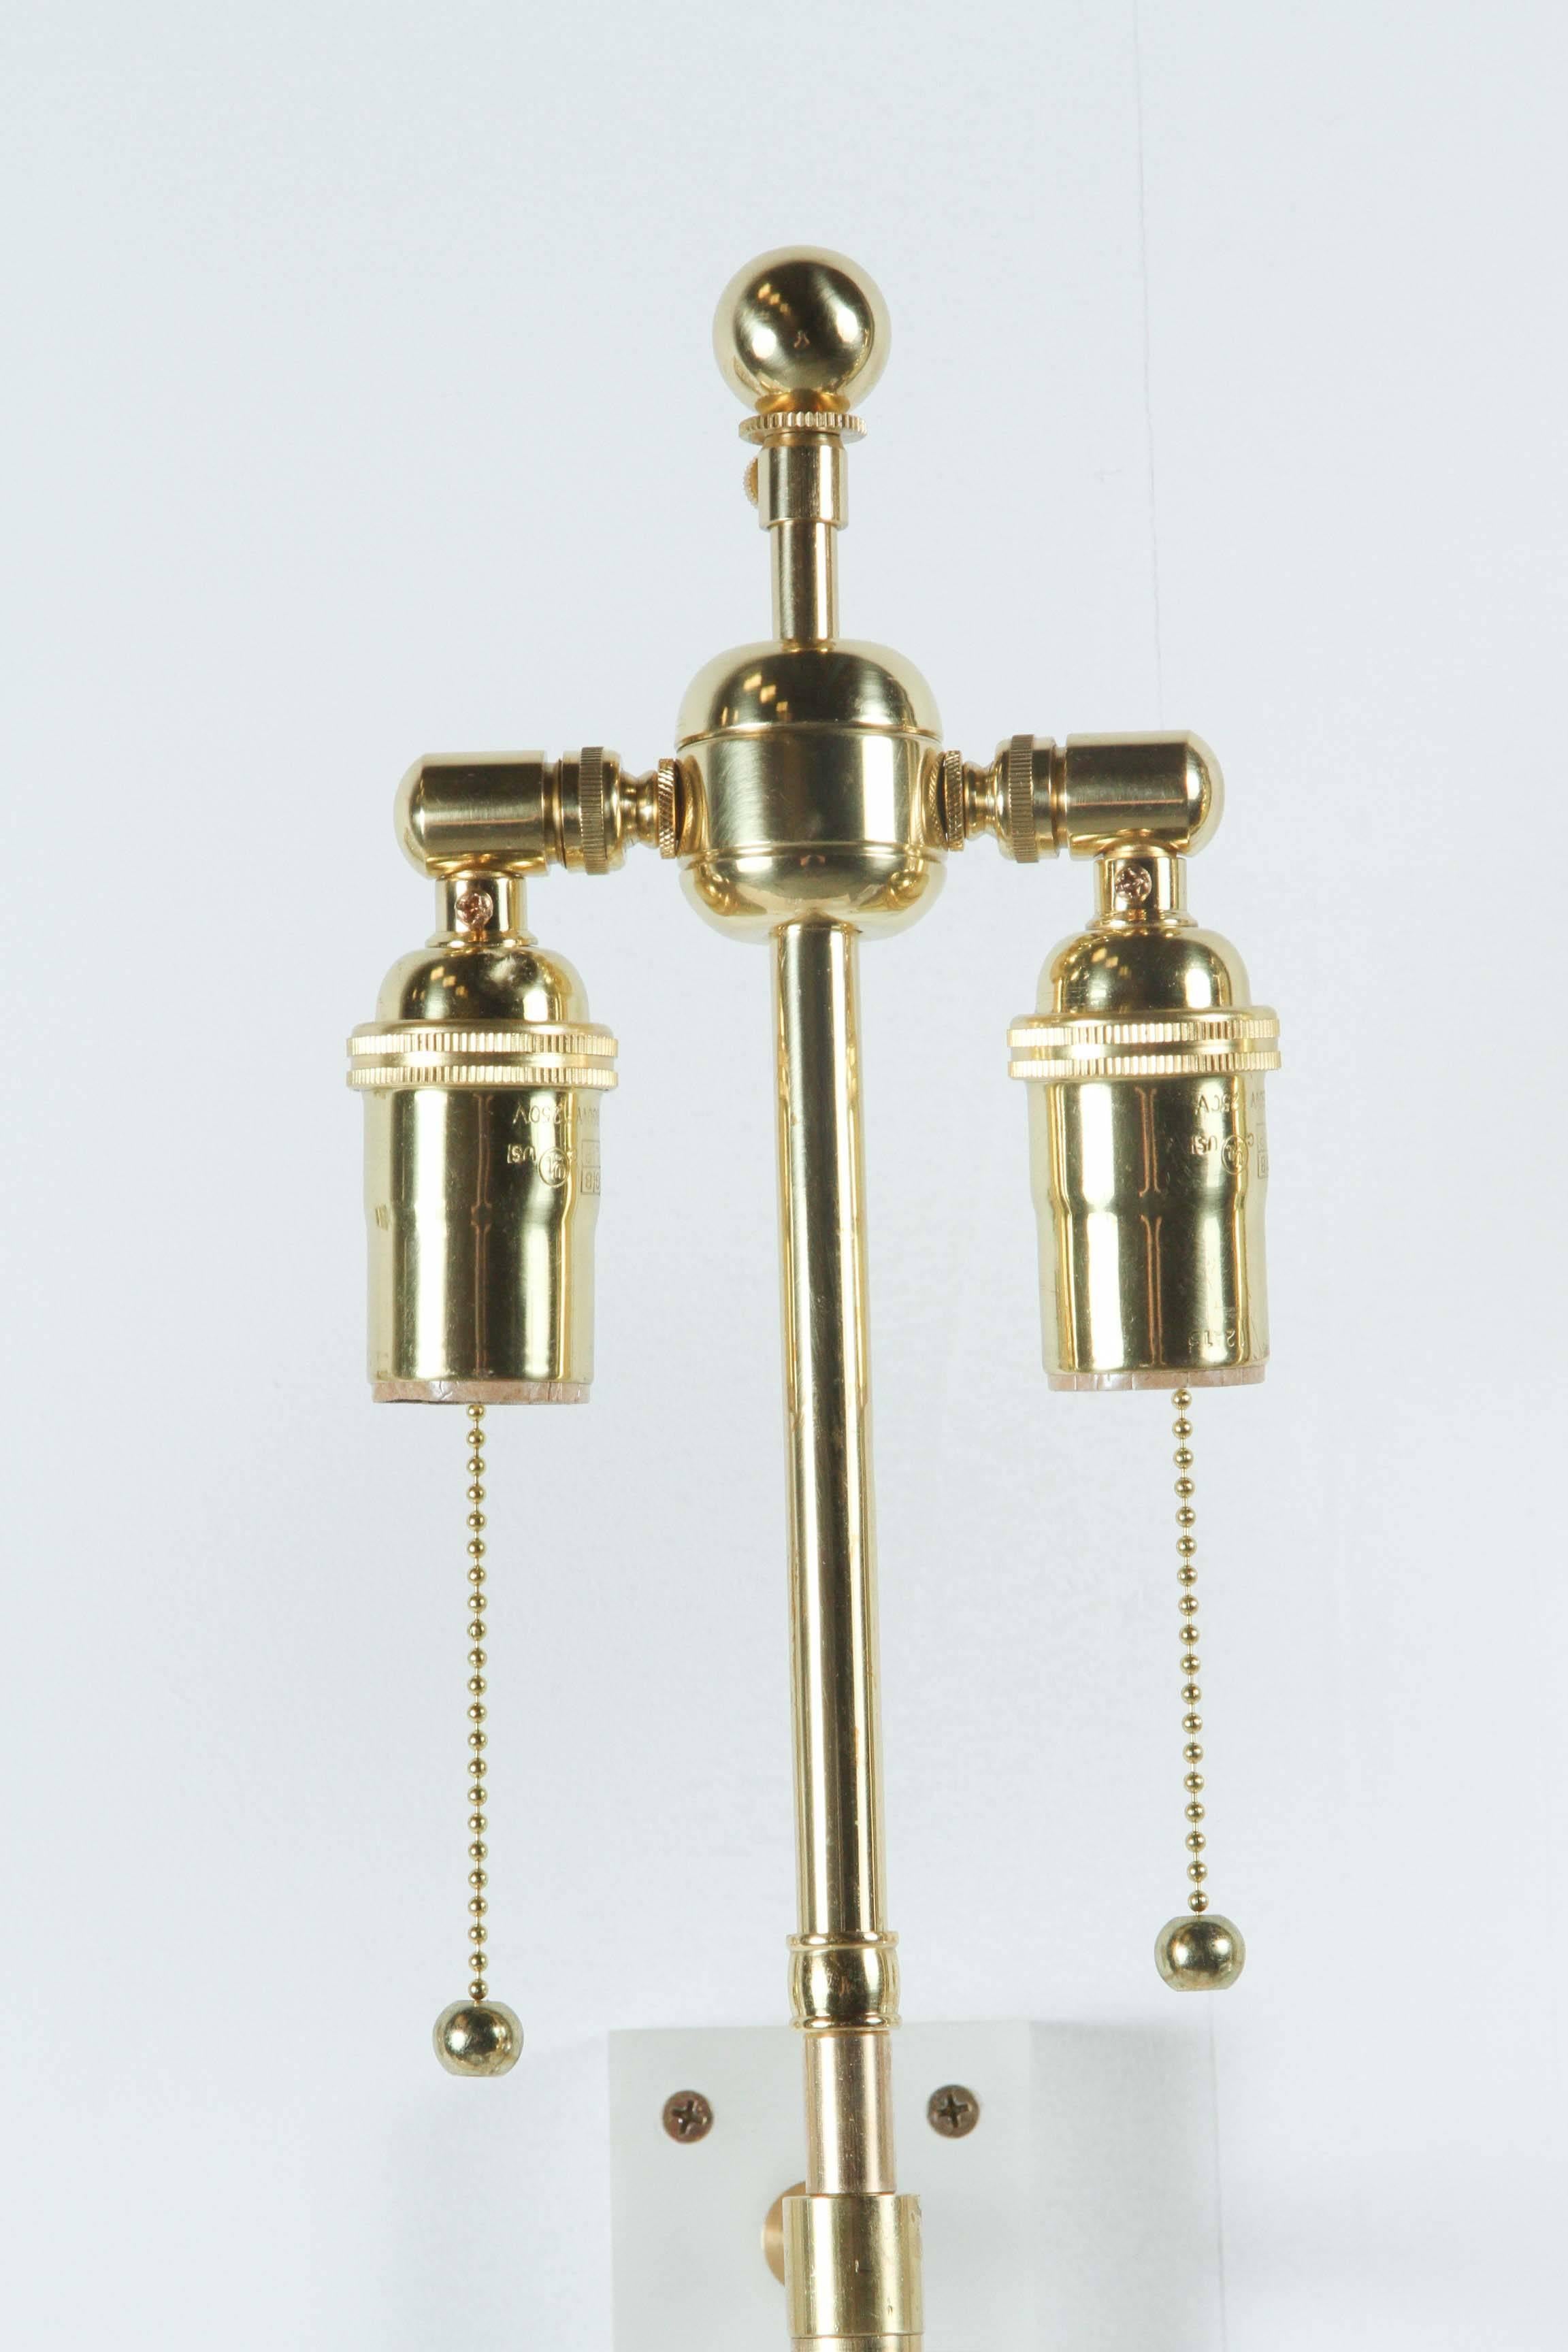 Stunning pair of Lucite and brass sconces.
The sconces have been newly rewired with polished brass double clusters
and require Demi-lune shades which are NOT included.